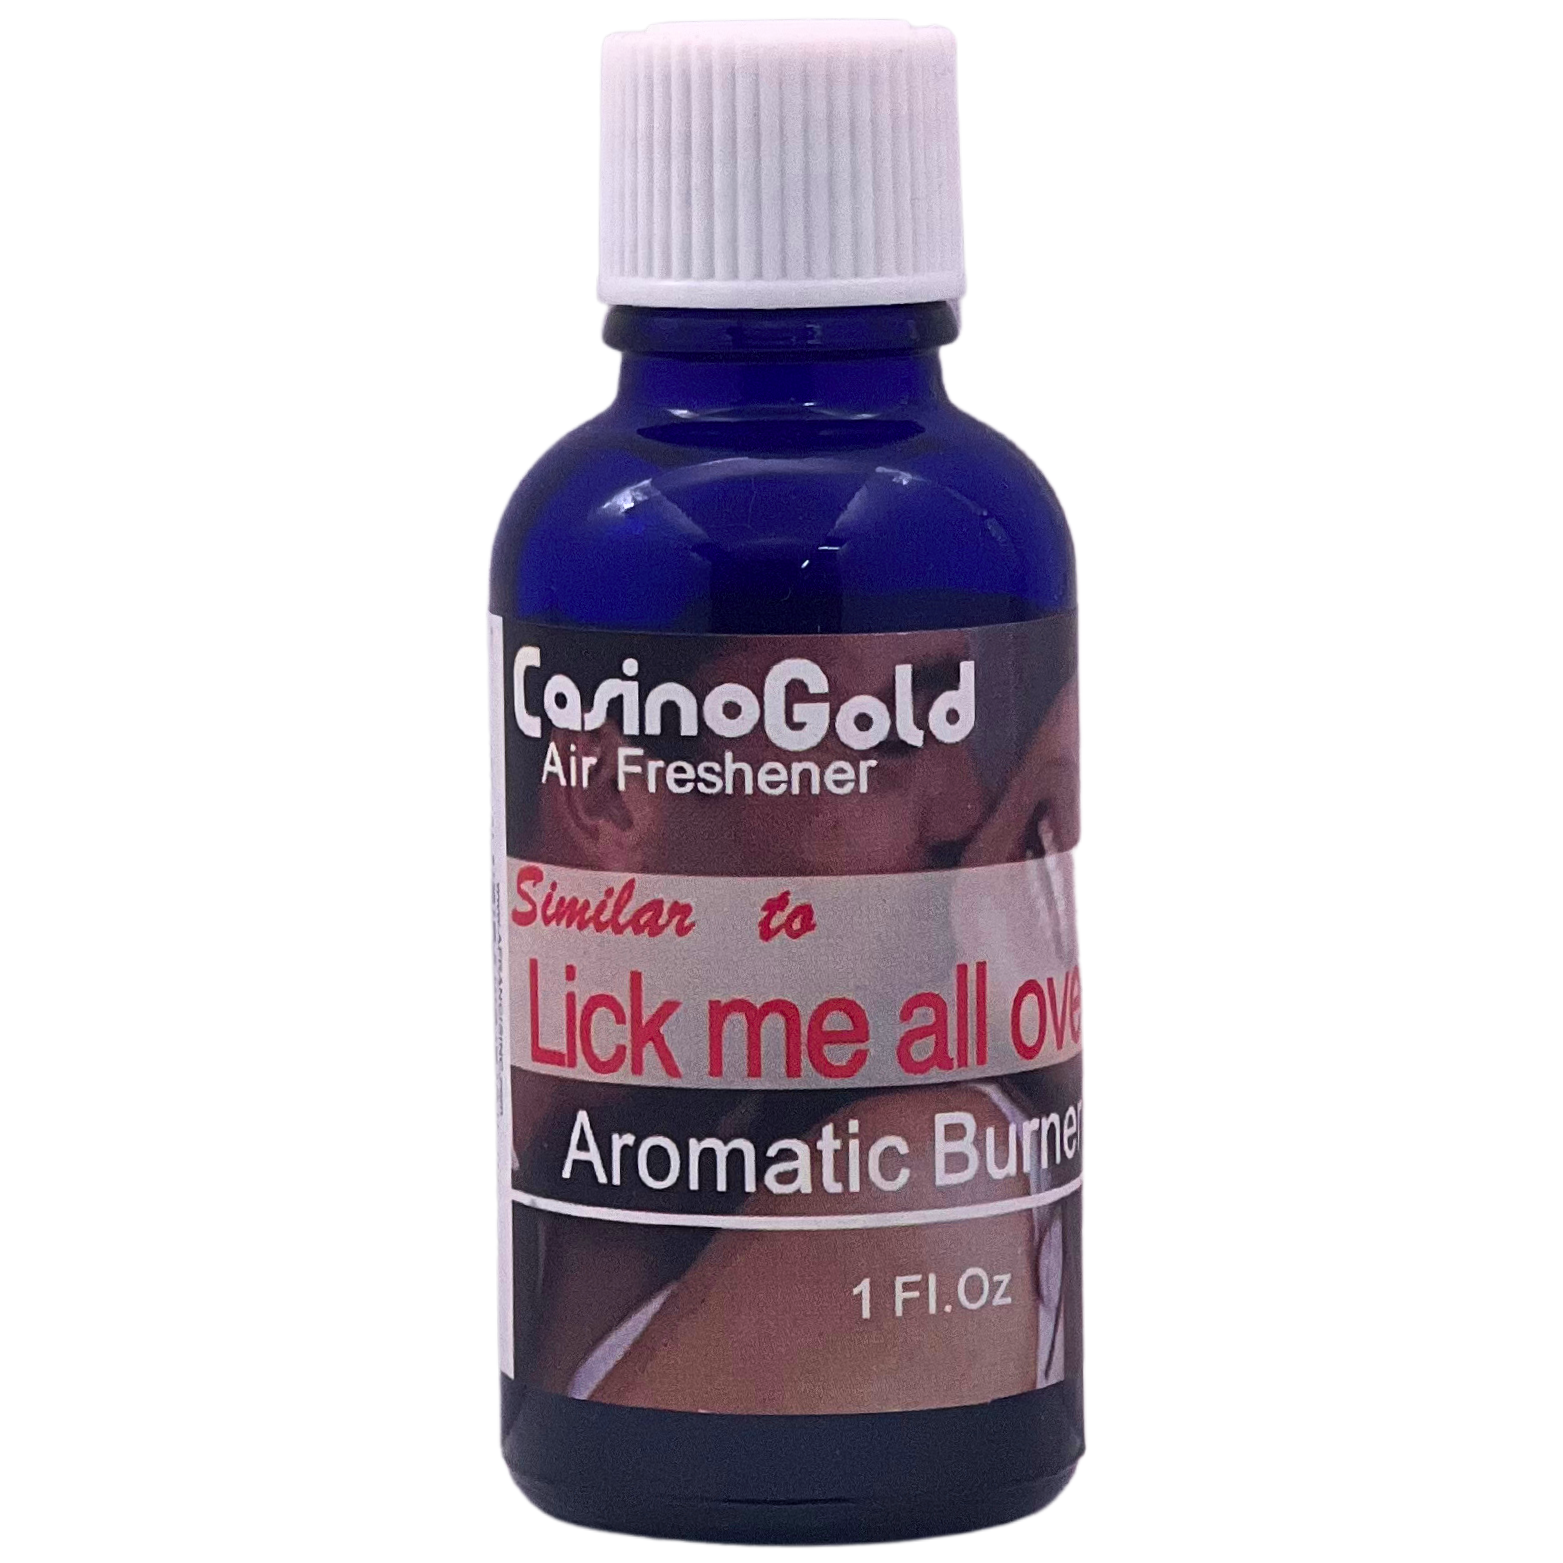 Casino Gold 1 Ounce Lick Me All Over Fragrance Oil